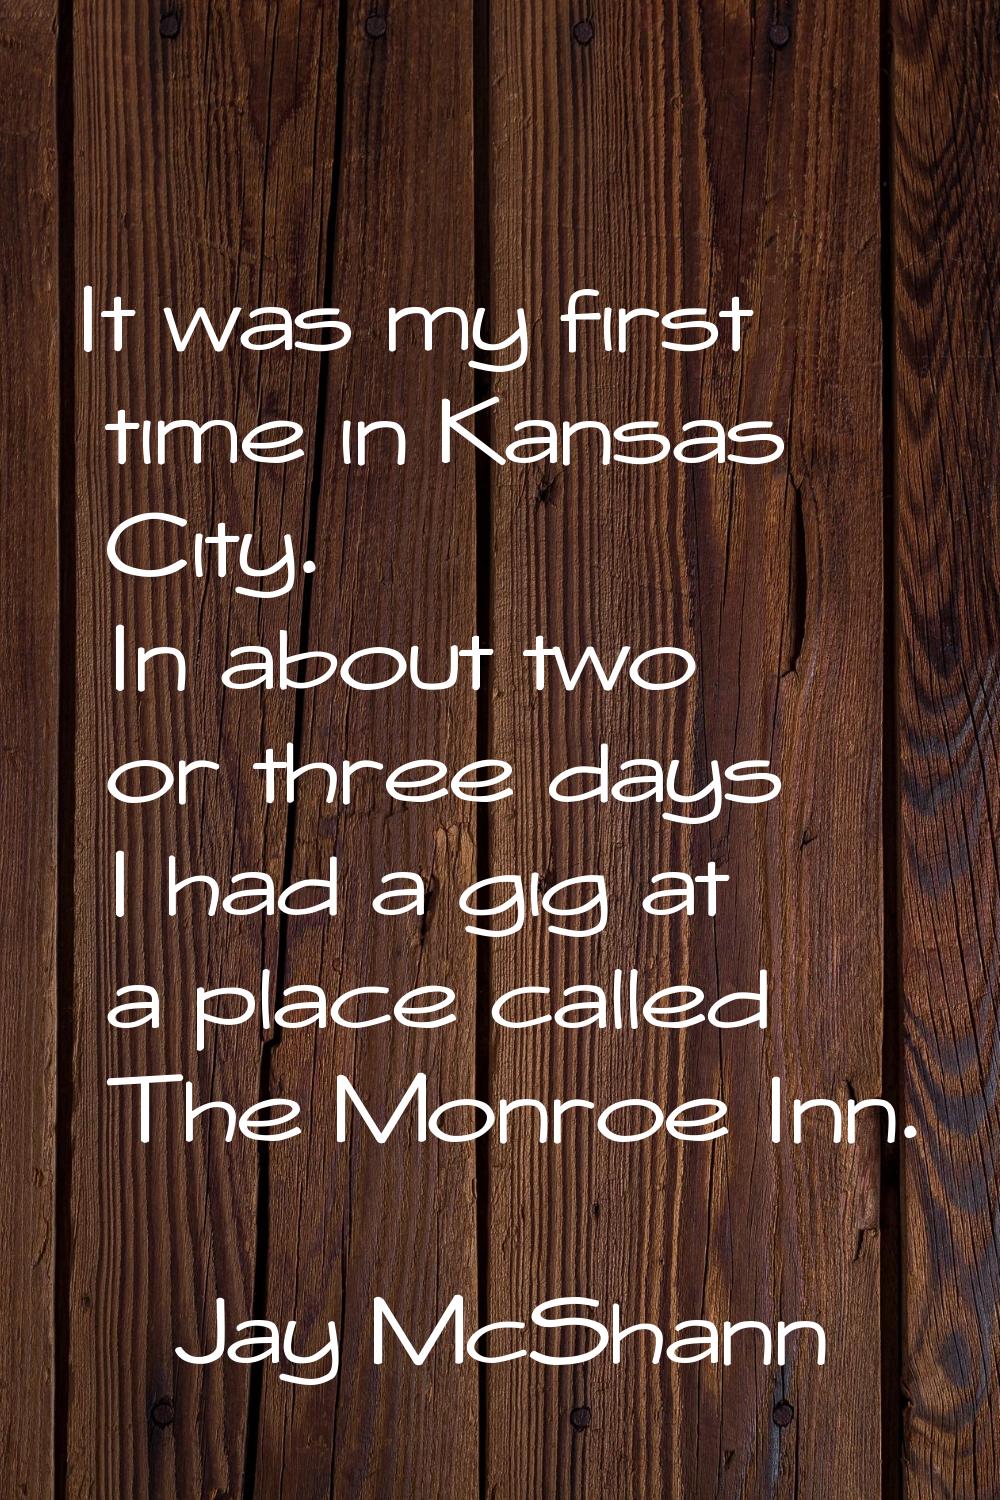 It was my first time in Kansas City. In about two or three days I had a gig at a place called The M